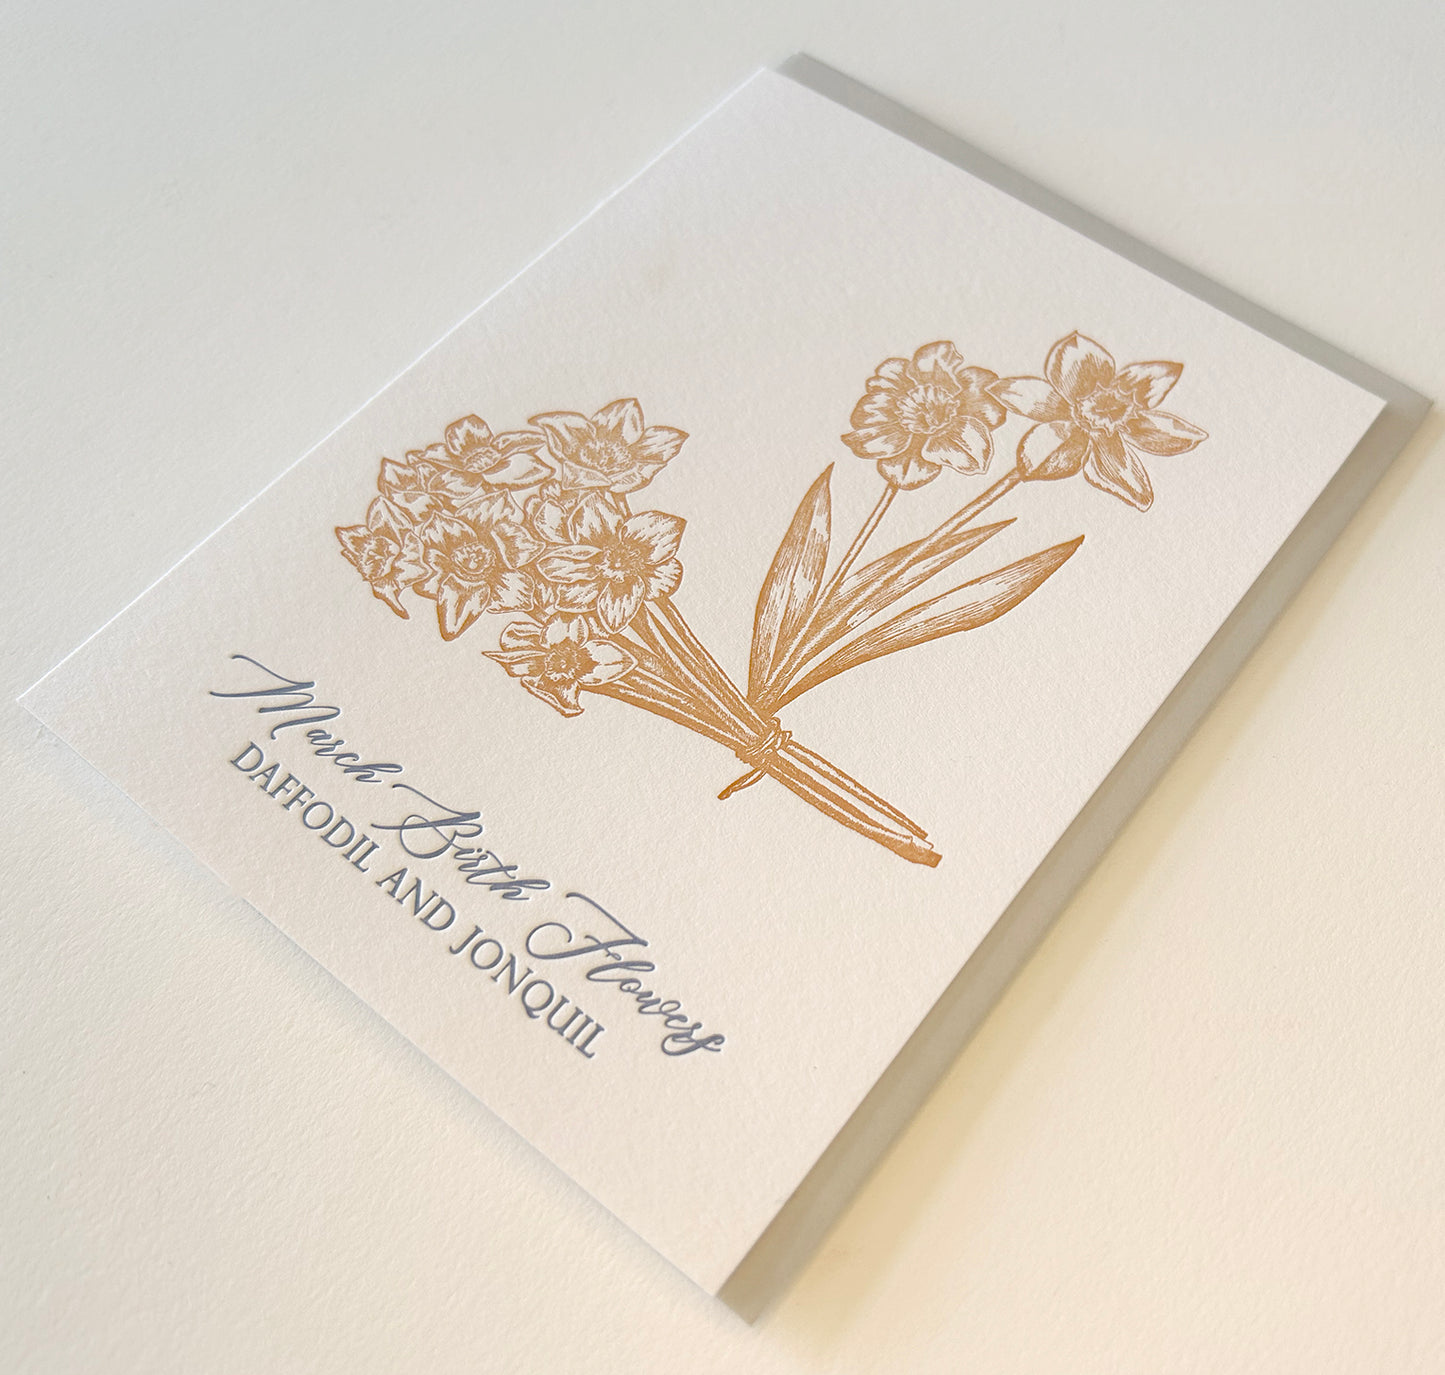 Letterpress birthday card with florals that says "March birth flowers daffodil and jonquil" by Rust Belt Love